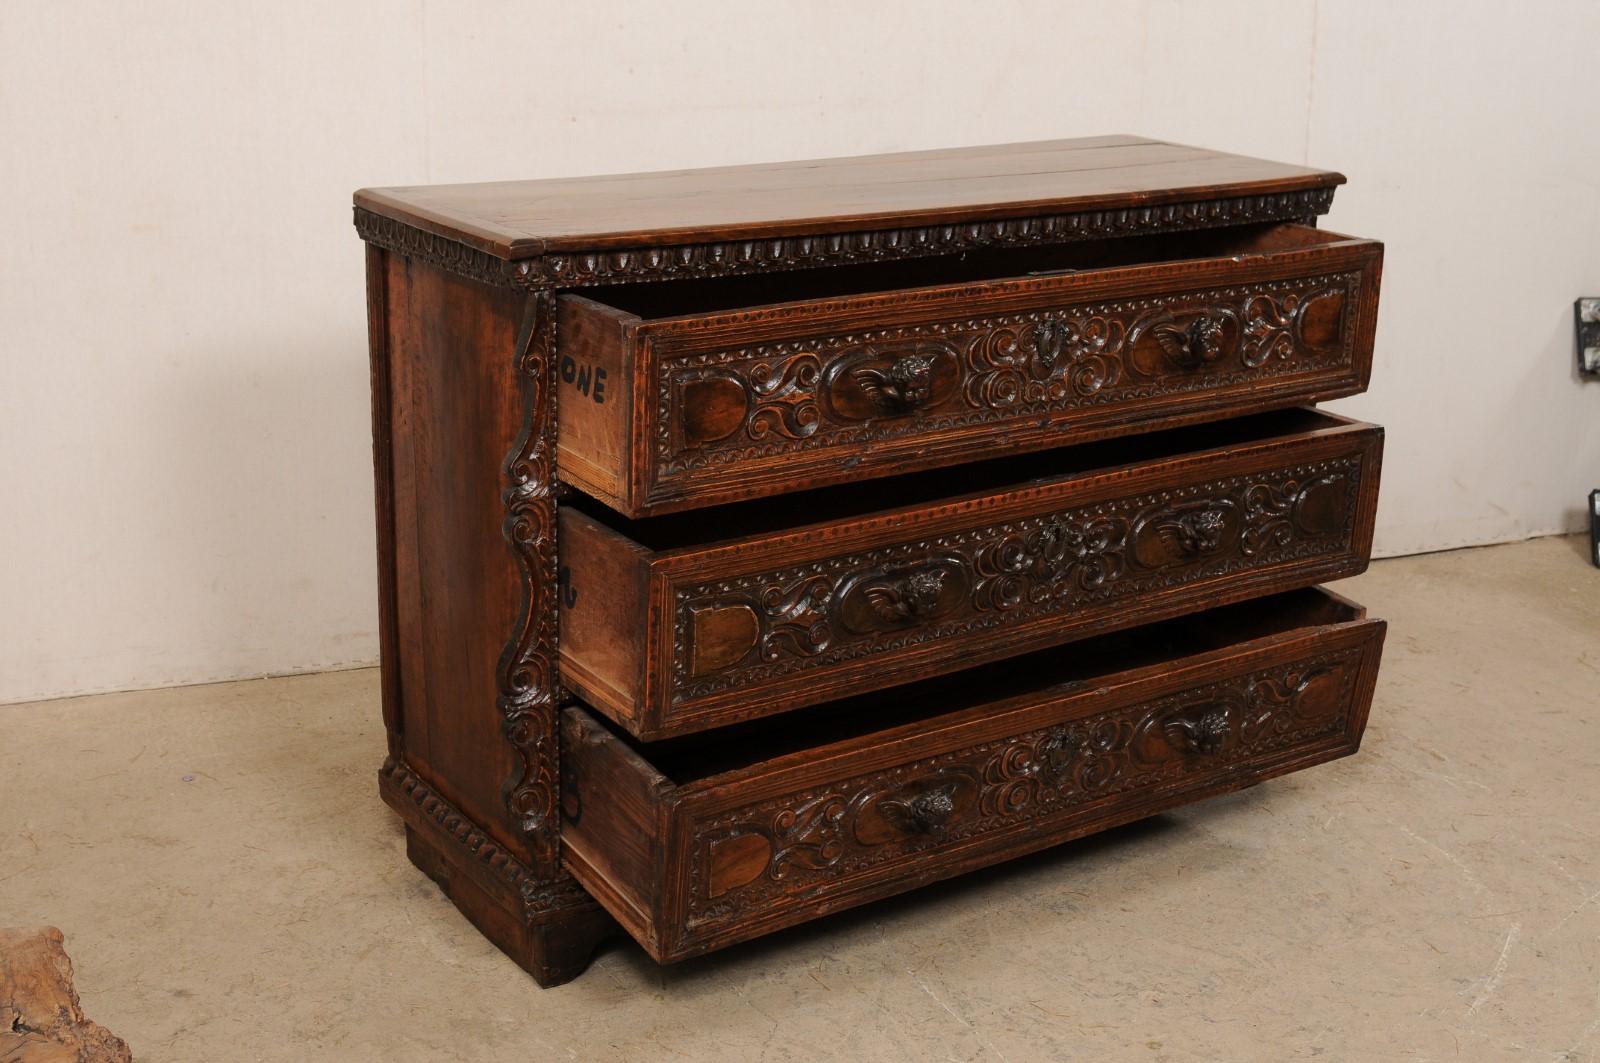 Early 18th C Italian Elaborately-Embellished Commode w/Putti Carved Drawer Pulls For Sale 2